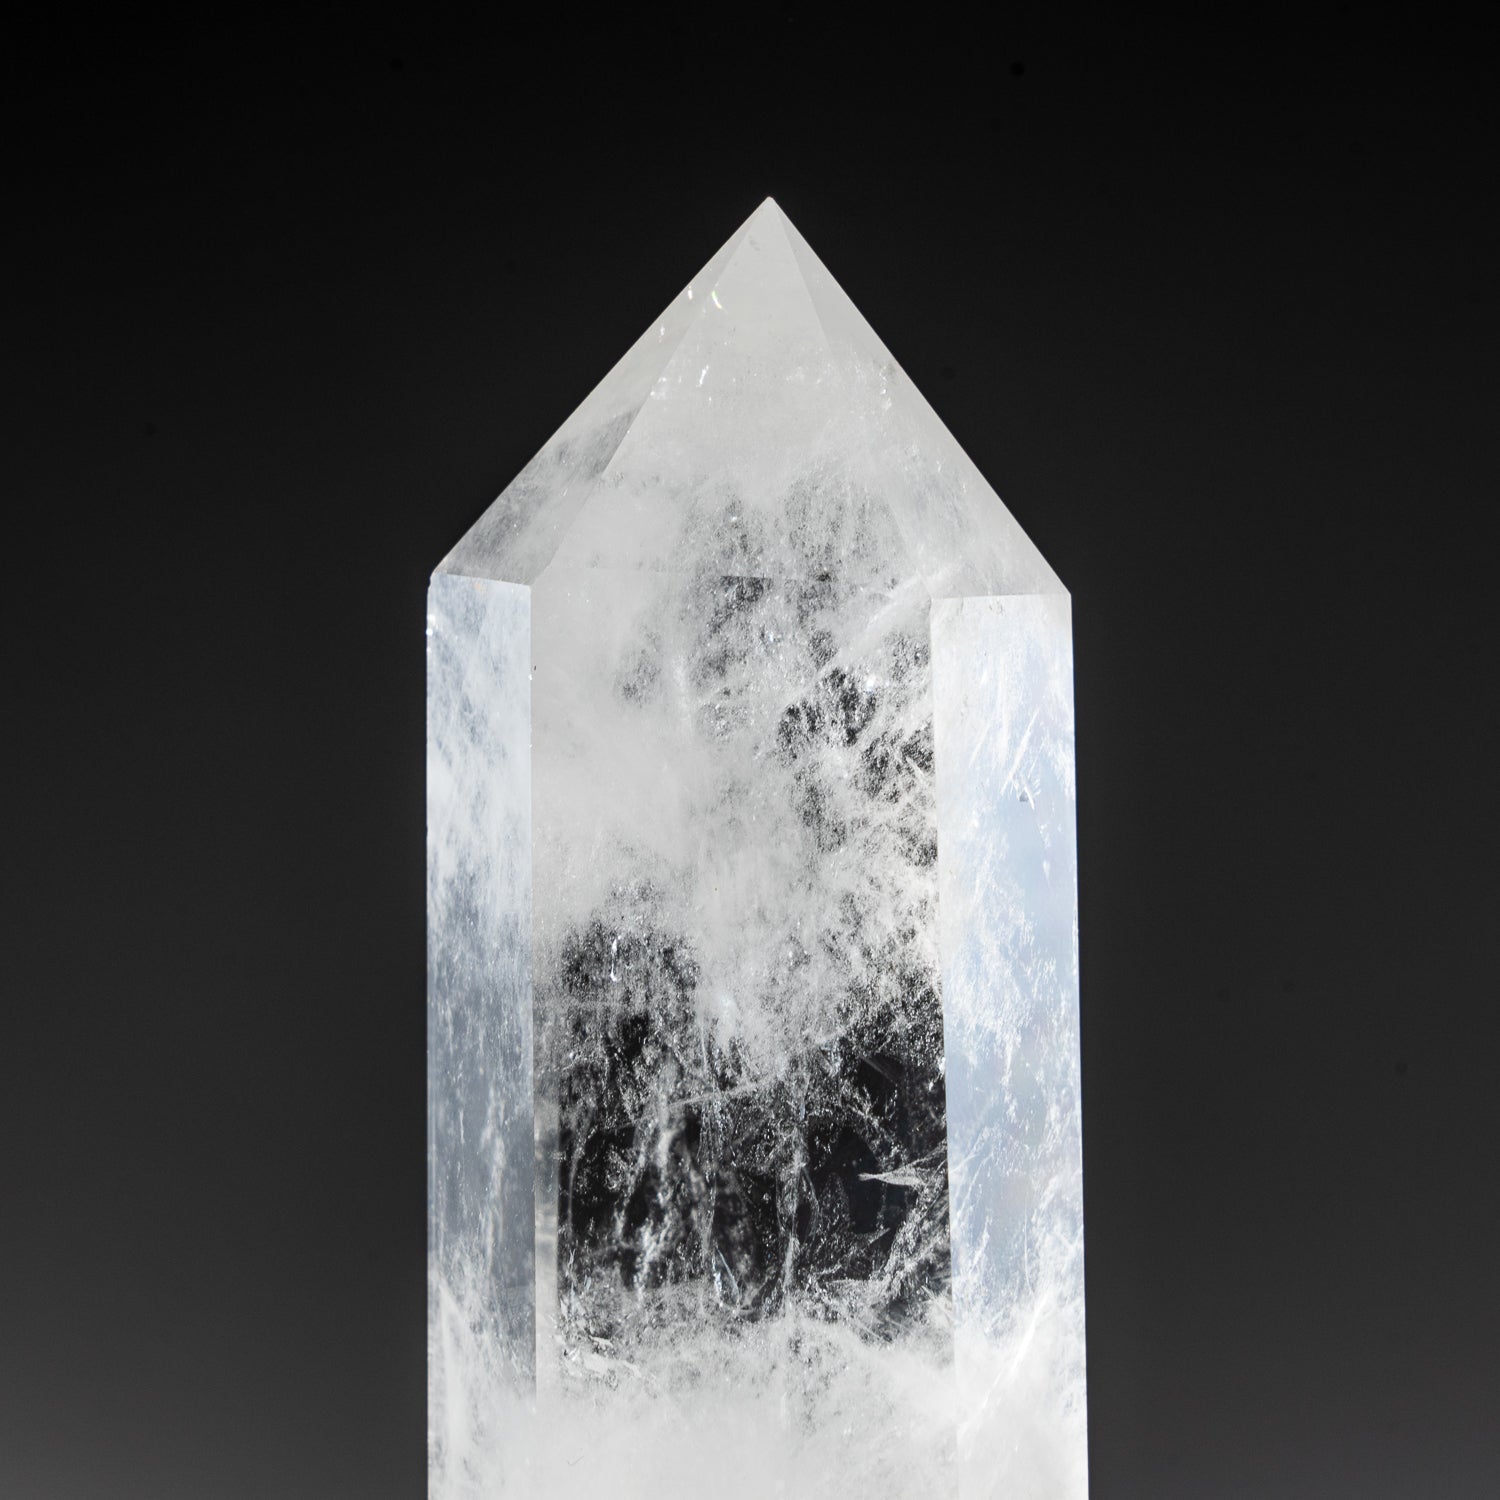 Genuine Polished Clear Quartz Point From Brazil (176.9 grams)